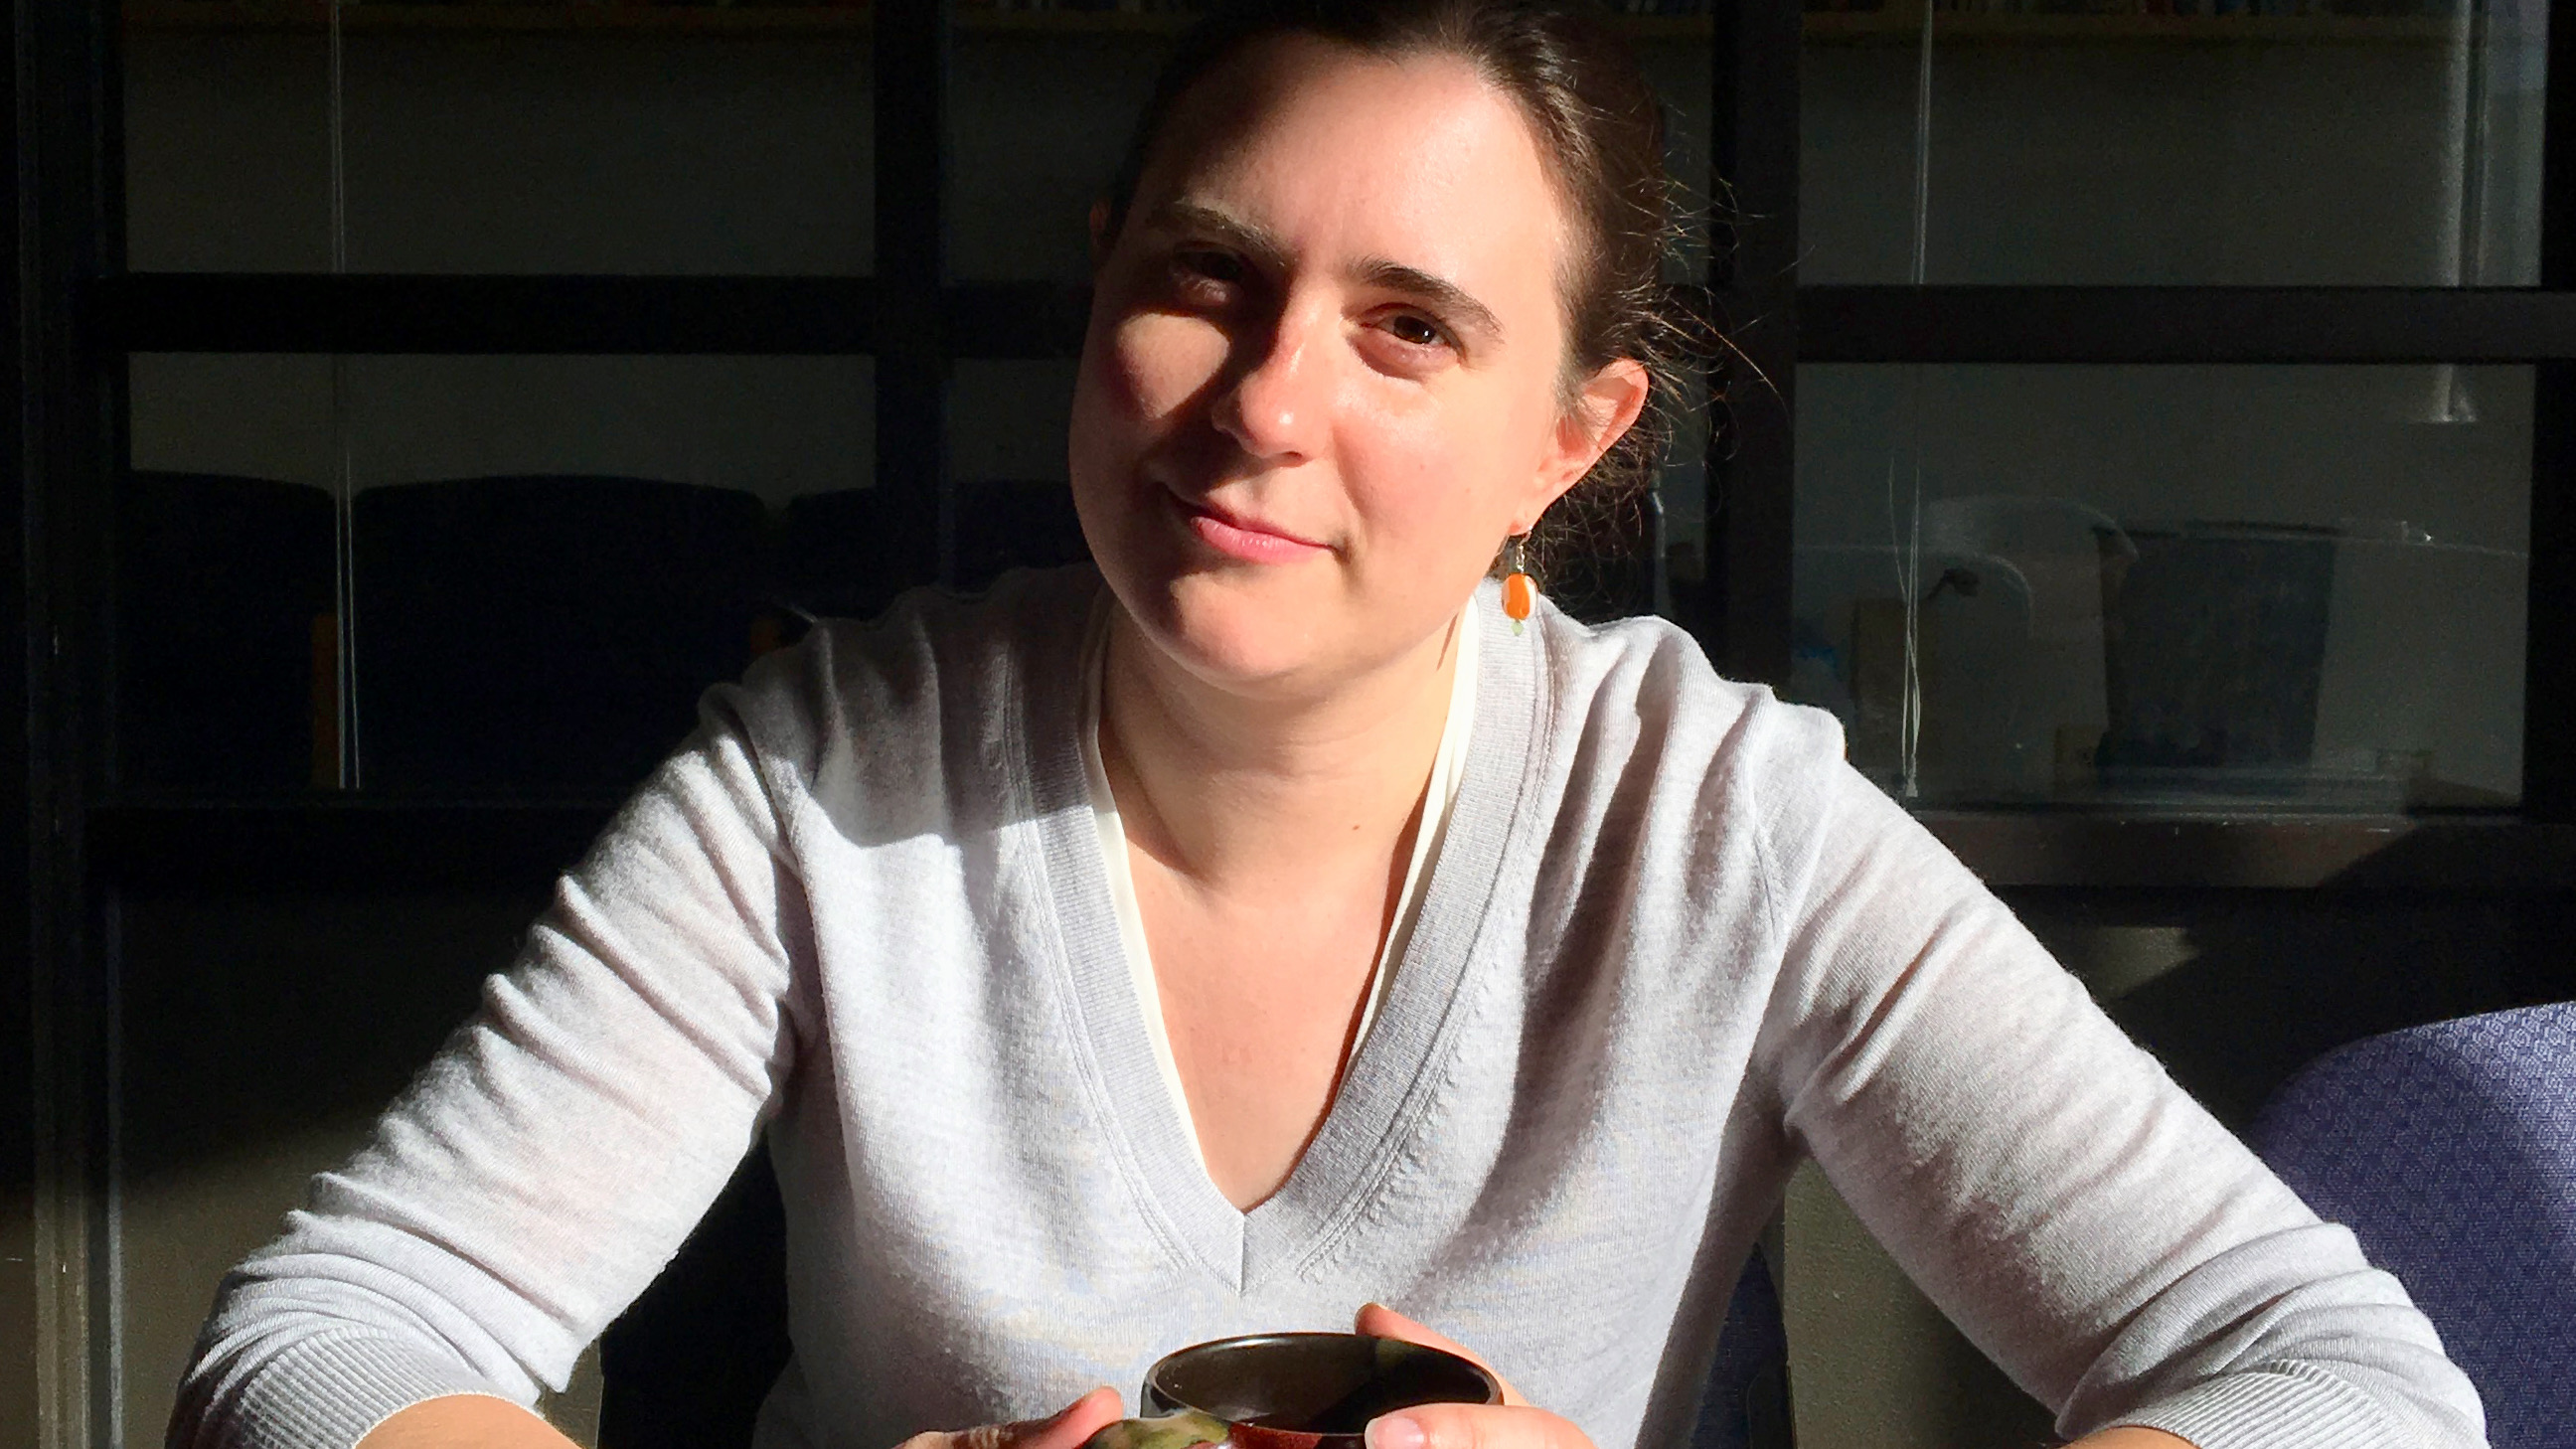 PhD student Laurel Perkins, facing the camera with a determined expression, sitting at a table in heavy shadow, holding a cup of tea in front of her